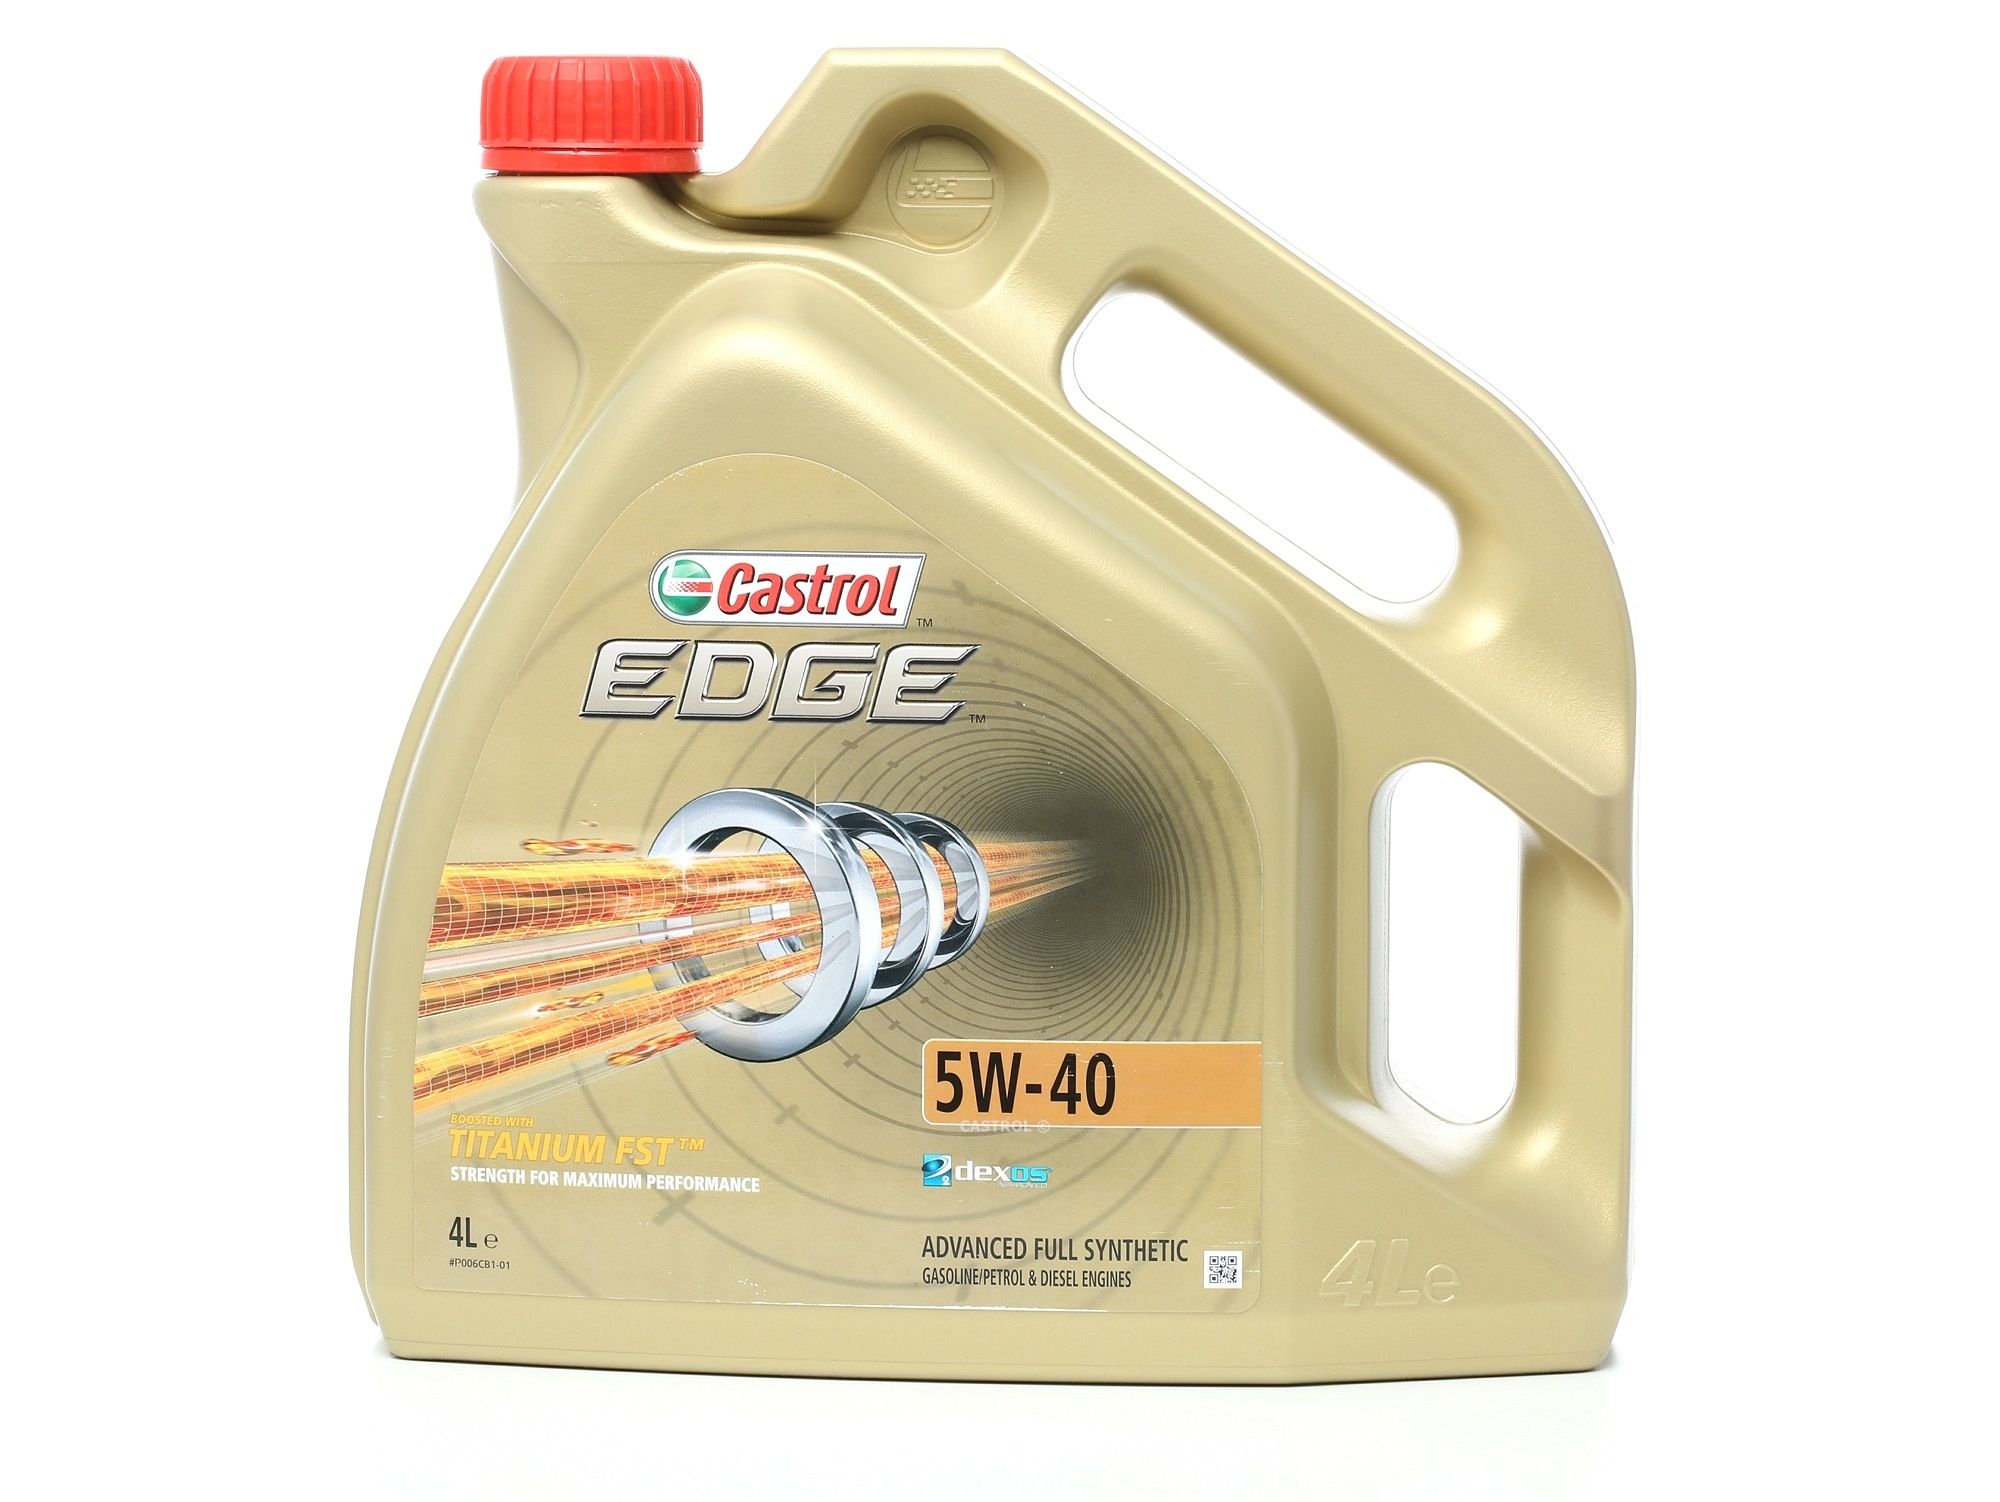 CASTROL EDGE 1535F3 Olie 5W-40, 4L, Volledig synthetisch